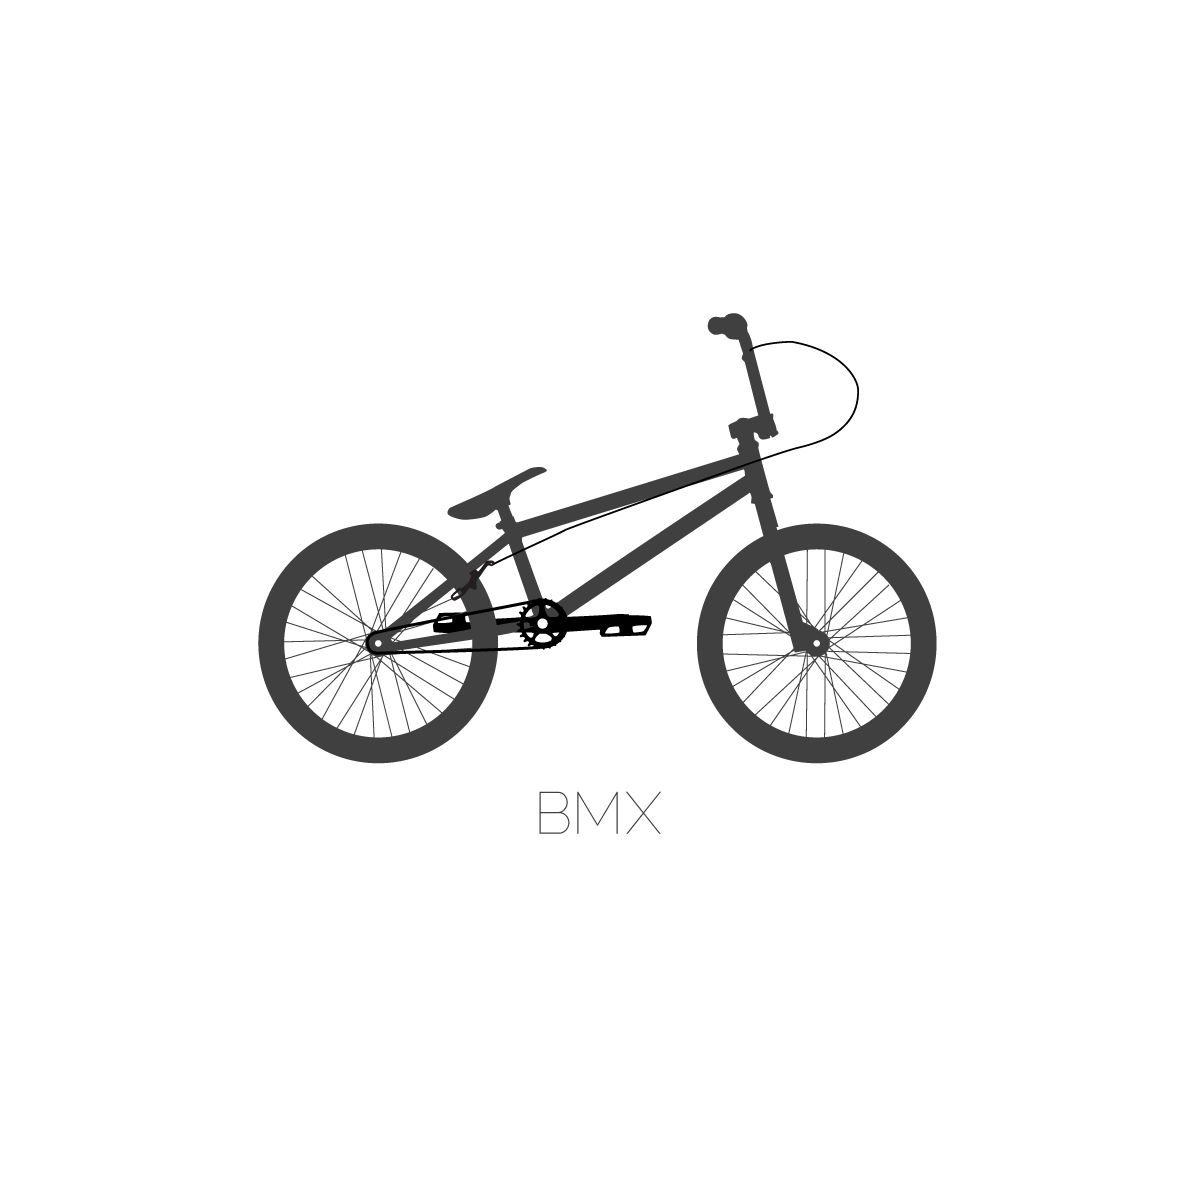 Vector Illustration of a BMX Bicycle